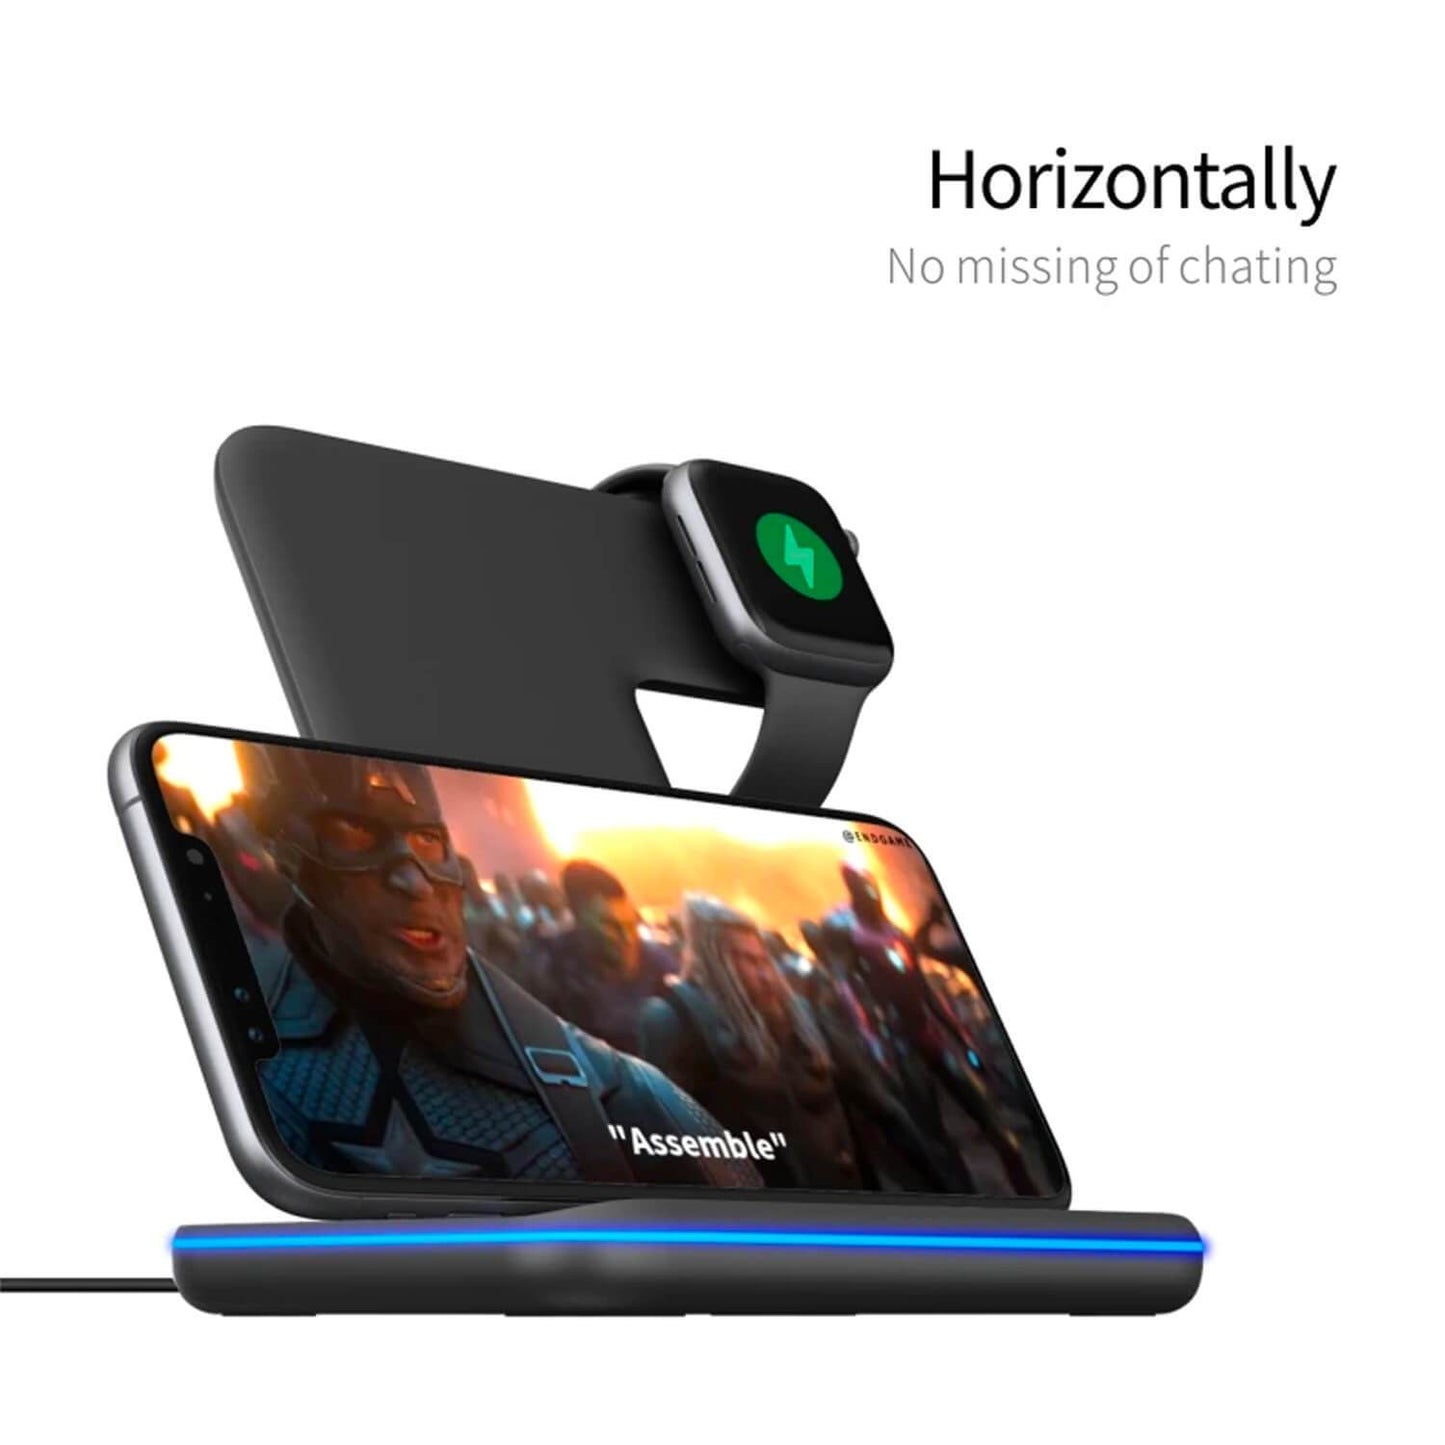 Tough On 3 in 1 Wireless Charger Stand Dock for Apple iPhone Watch Airpods